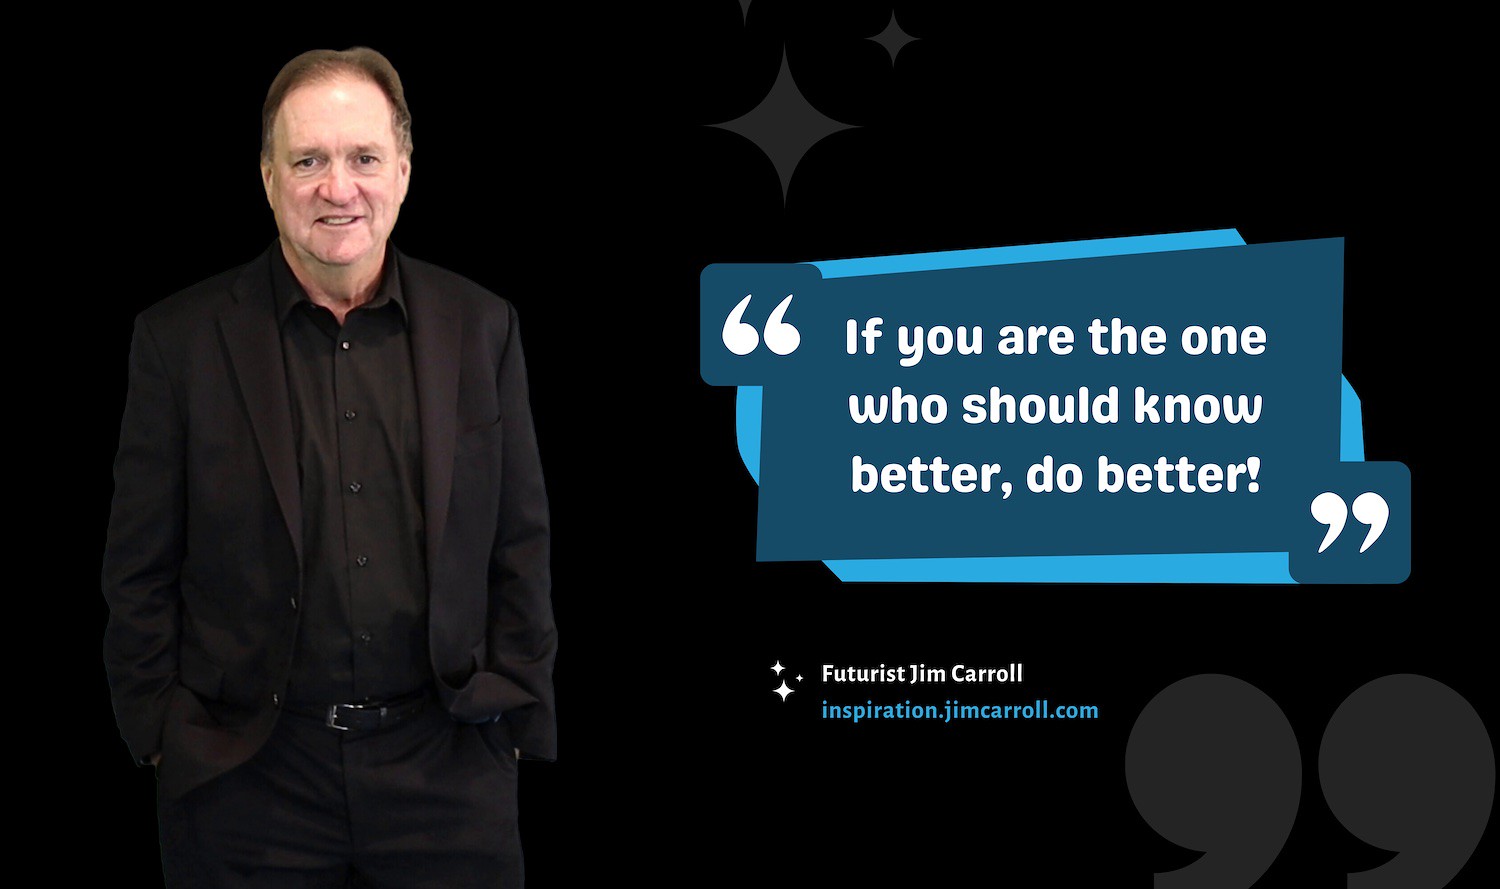 "If you are the one who should know better, do better!" - Futurist Jim Carroll